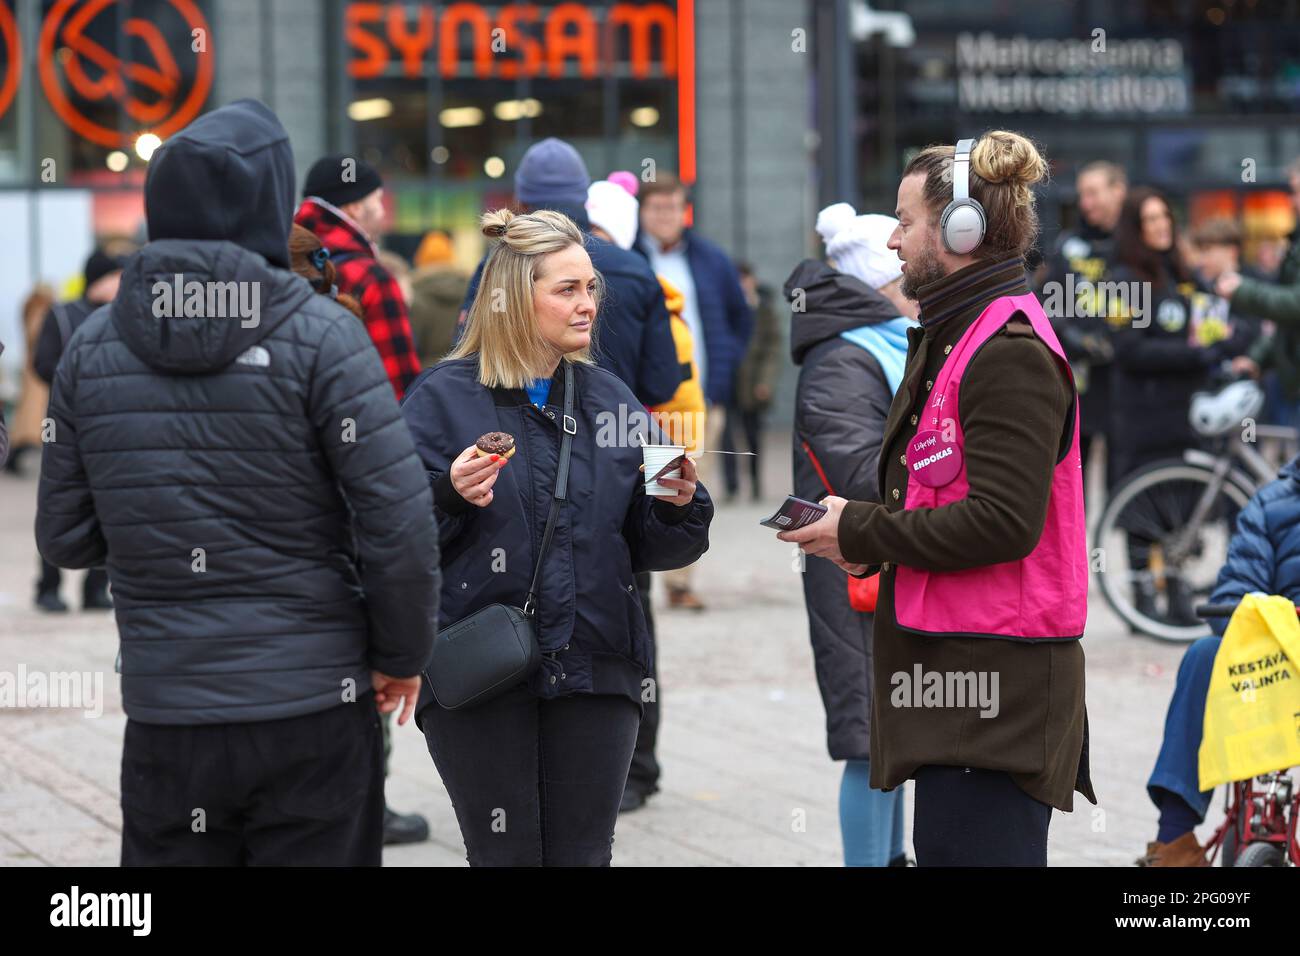 Election campaign members of Movement Now (Liike Nyt) party distribute leaflets and coffee with sweets. The Parliamentary Elections of 2023 in Finland will be held on Sunday 2 April 2023. Party candidates held election campaigns in the center of Helsinki, in front of Kamppy Shopping Center at Narinkka Square. Stock Photo